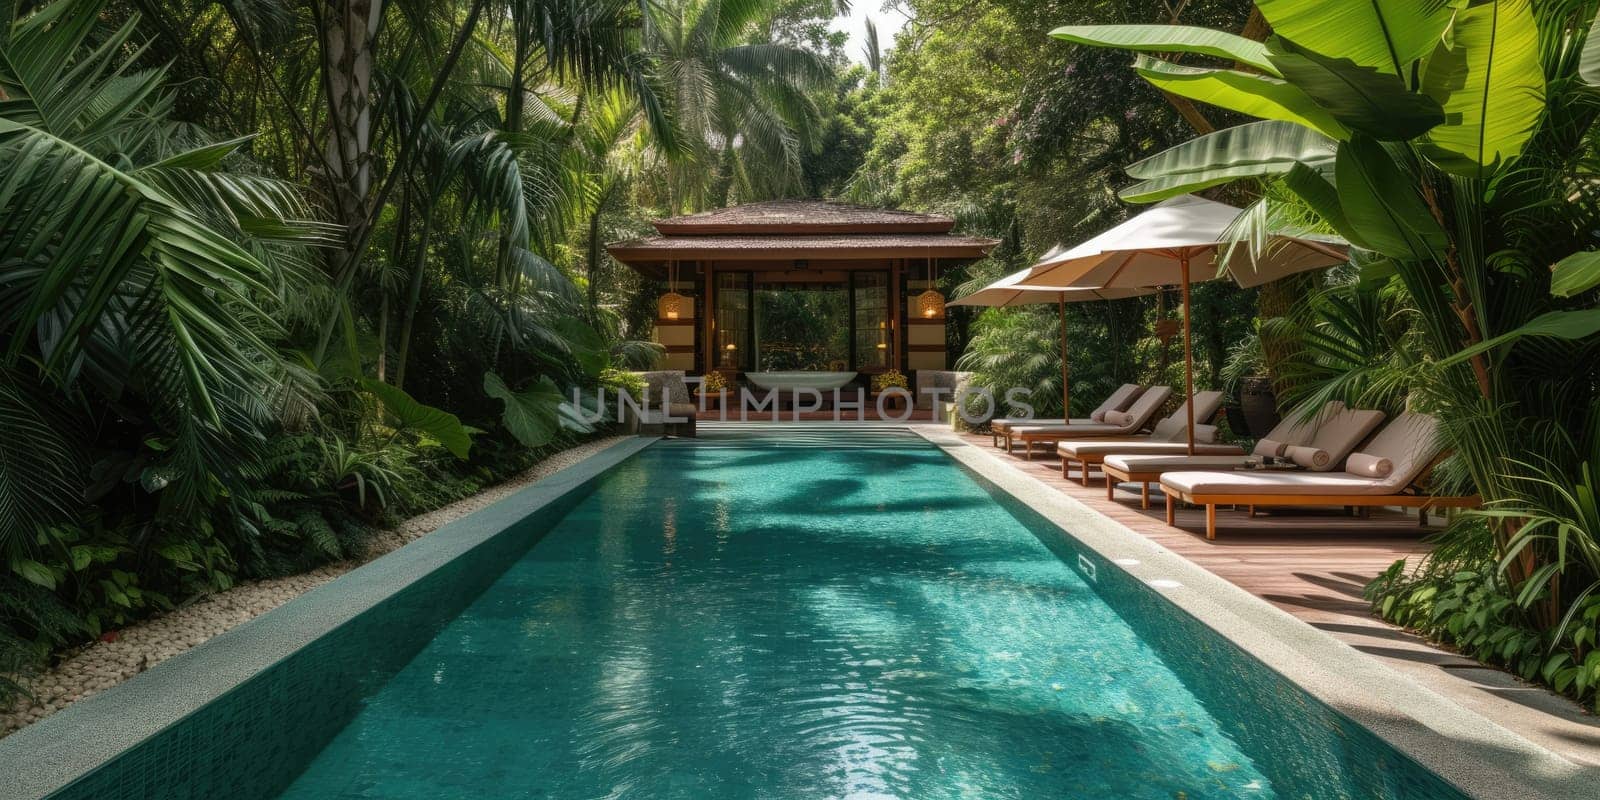 A luxurious spa retreat in a tropical setting, serene pool. Resplendent. by biancoblue